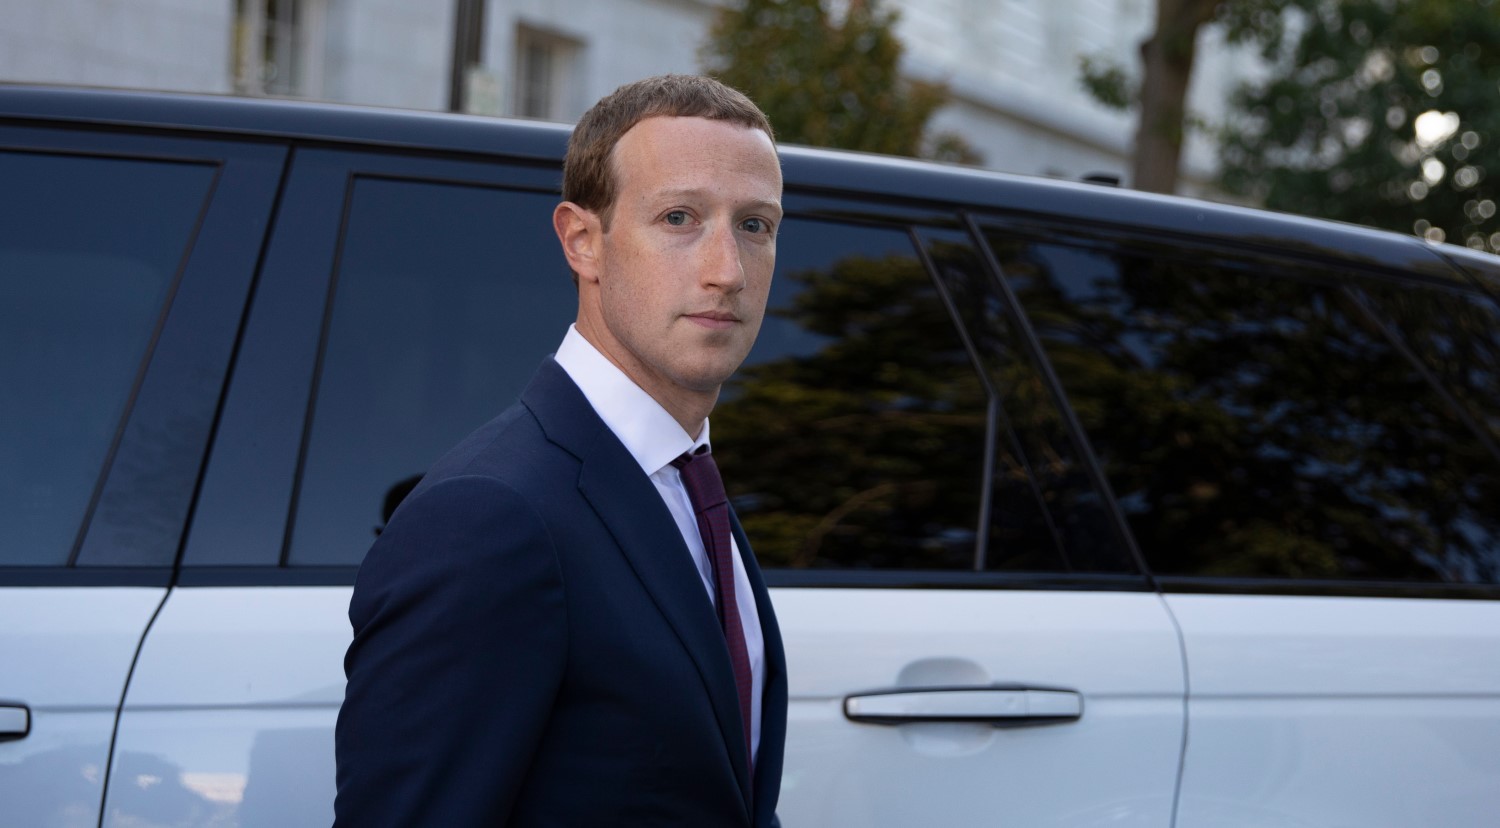 What To Expect When Facebook’s Zuckerberg Defends Libra On Capitol Hill